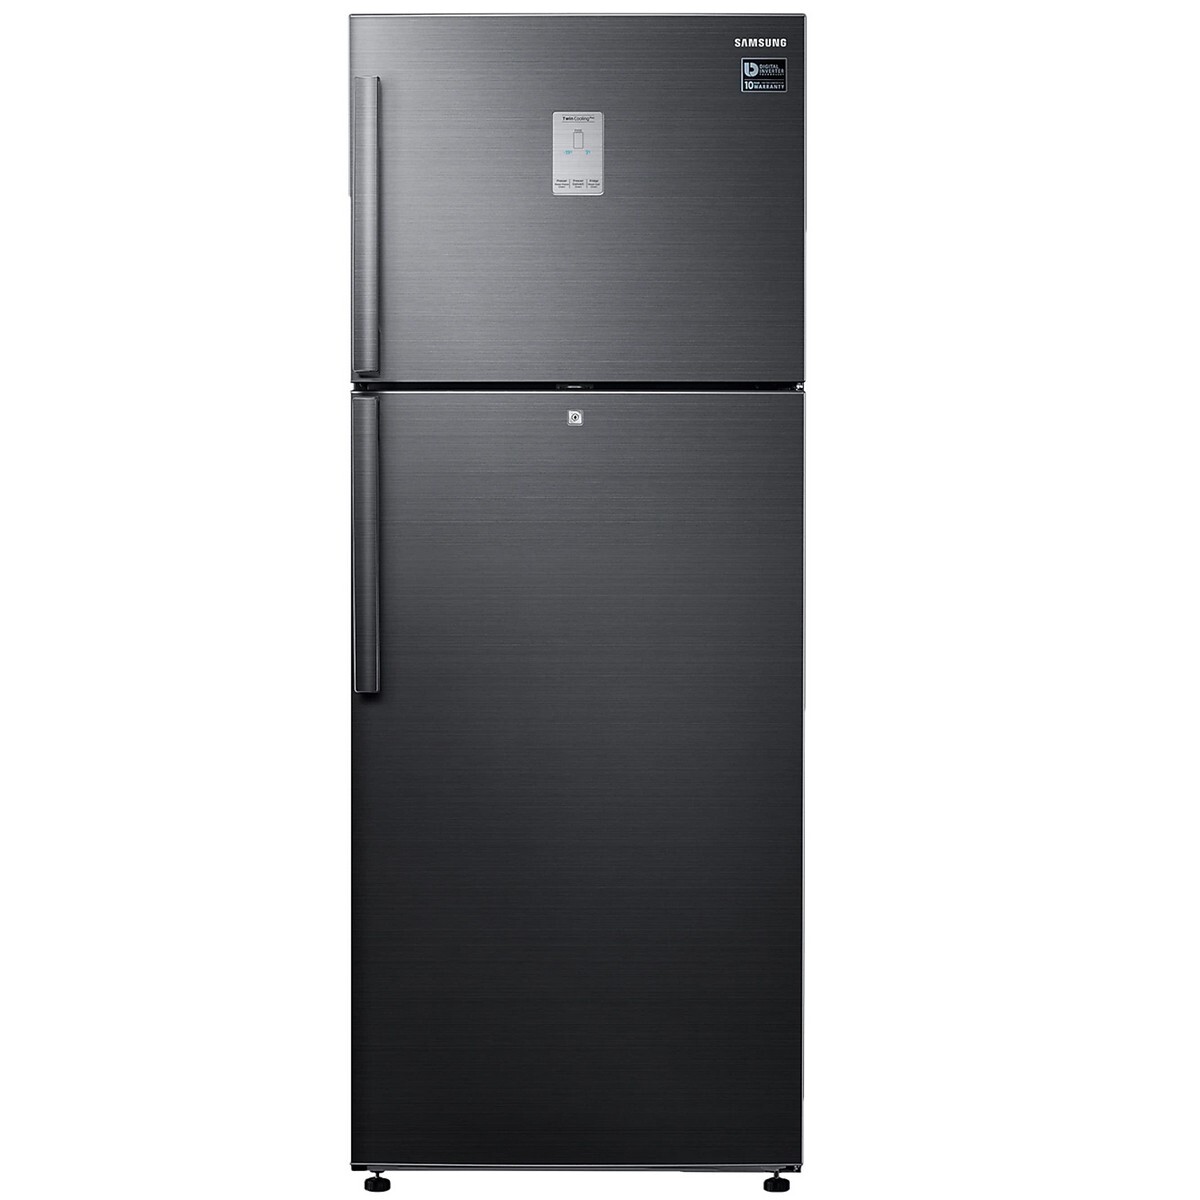 Samsung Twin Cooling Plus Double Door Refrigerator RT49B6338BS 478Ltr